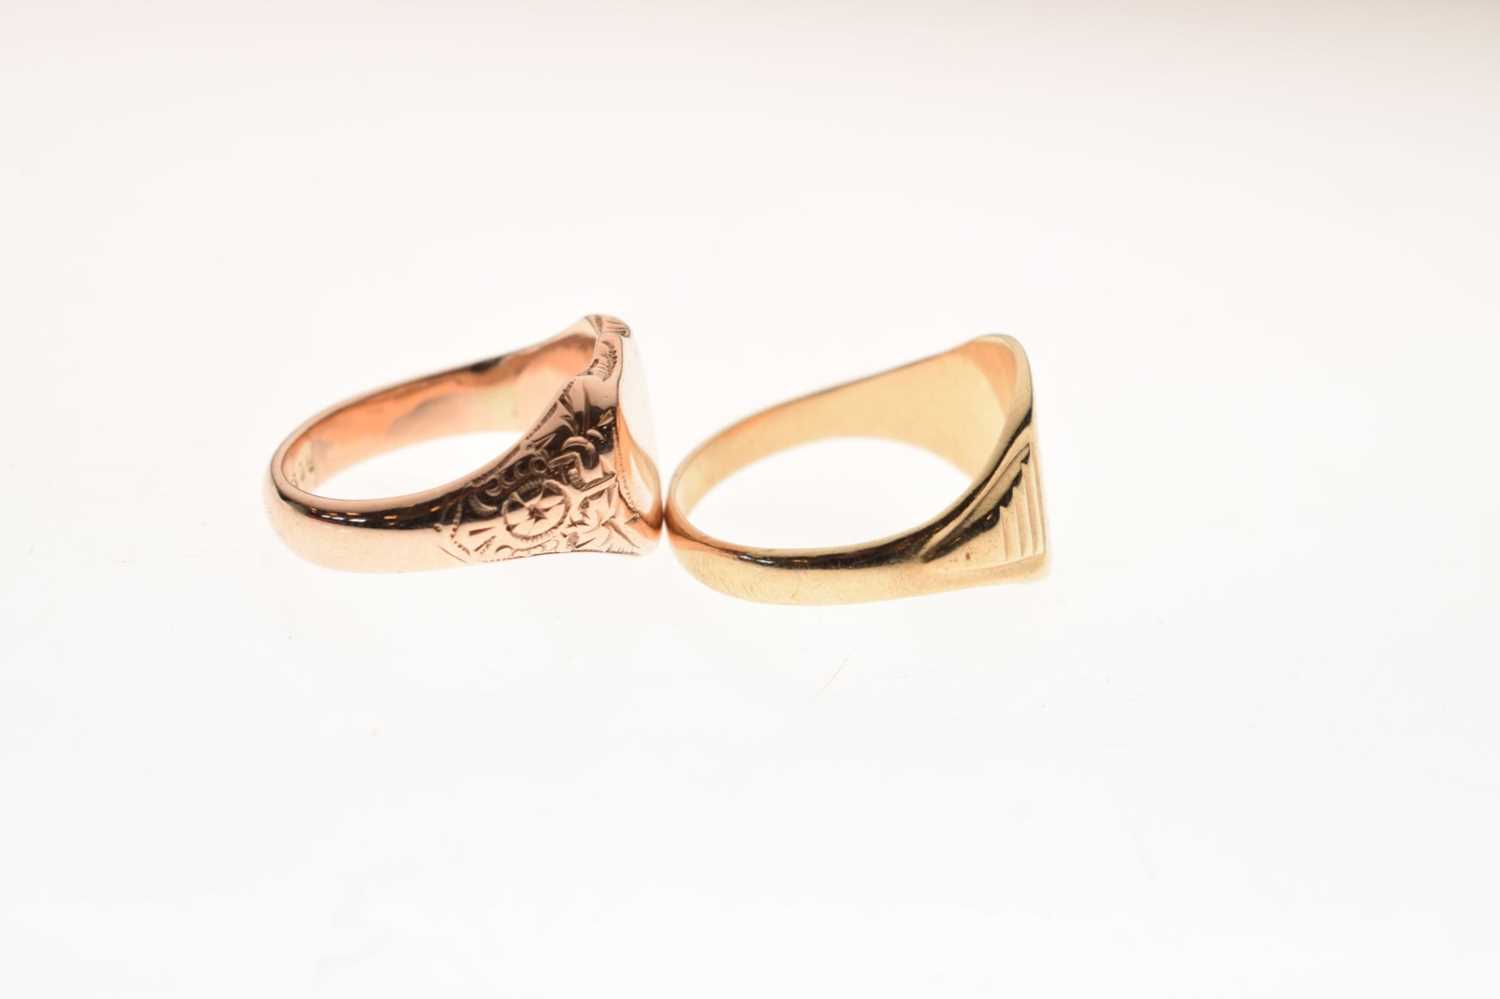 Two 9ct gold signet rings - Image 4 of 7